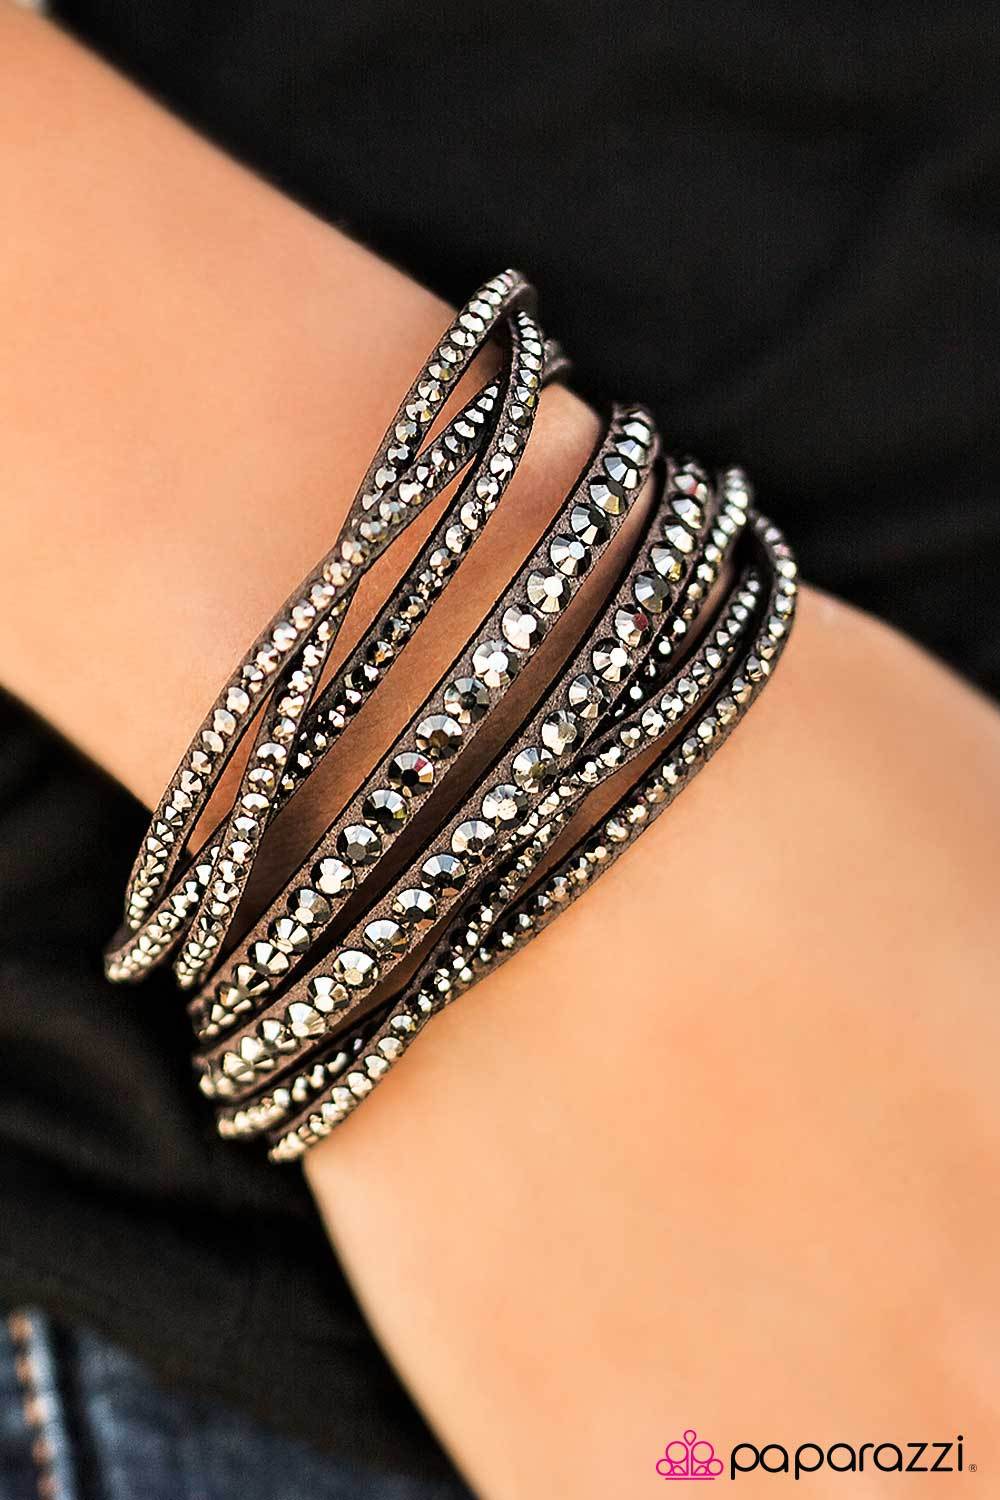 All Hairspray and Glitter Silver and Hematite Urban Wrap Snap Bracelet - Paparazzi Accessories-CarasShop.com - $5 Jewelry by Cara Jewels